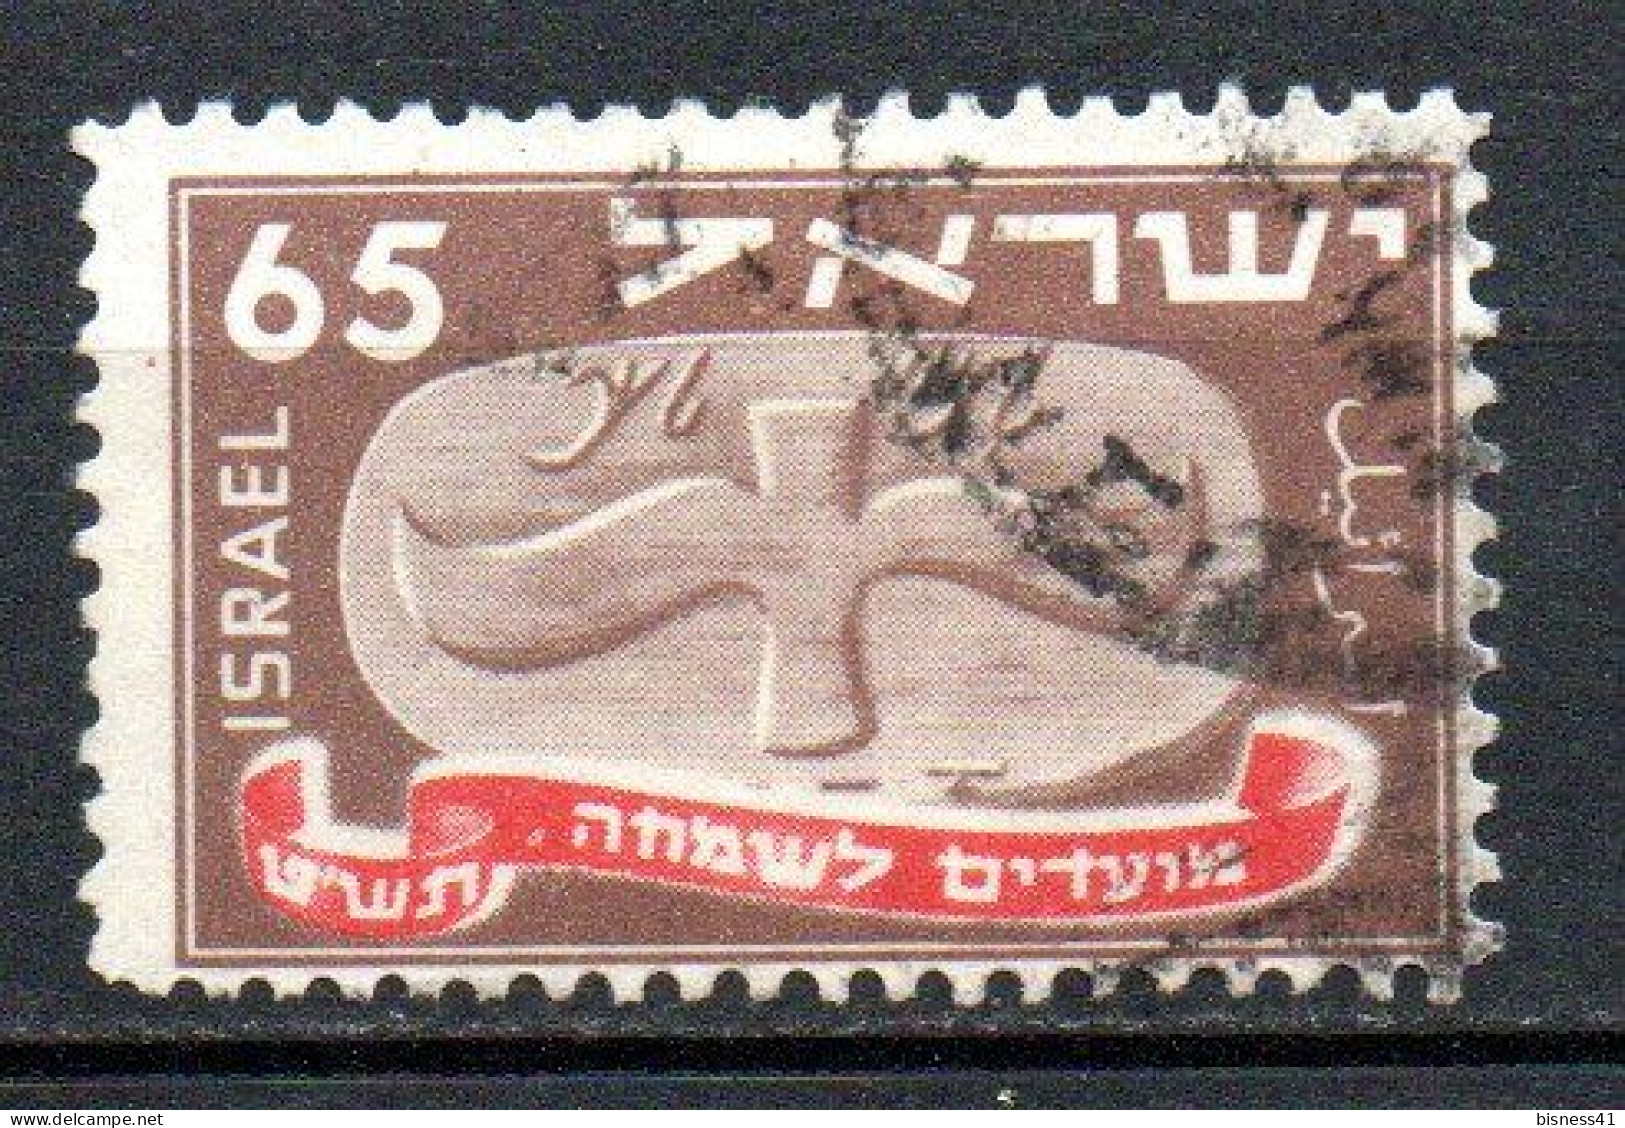 Col33 Israel  1948  N° 14  Oblitéré  Cote : 8,50€ - Used Stamps (without Tabs)